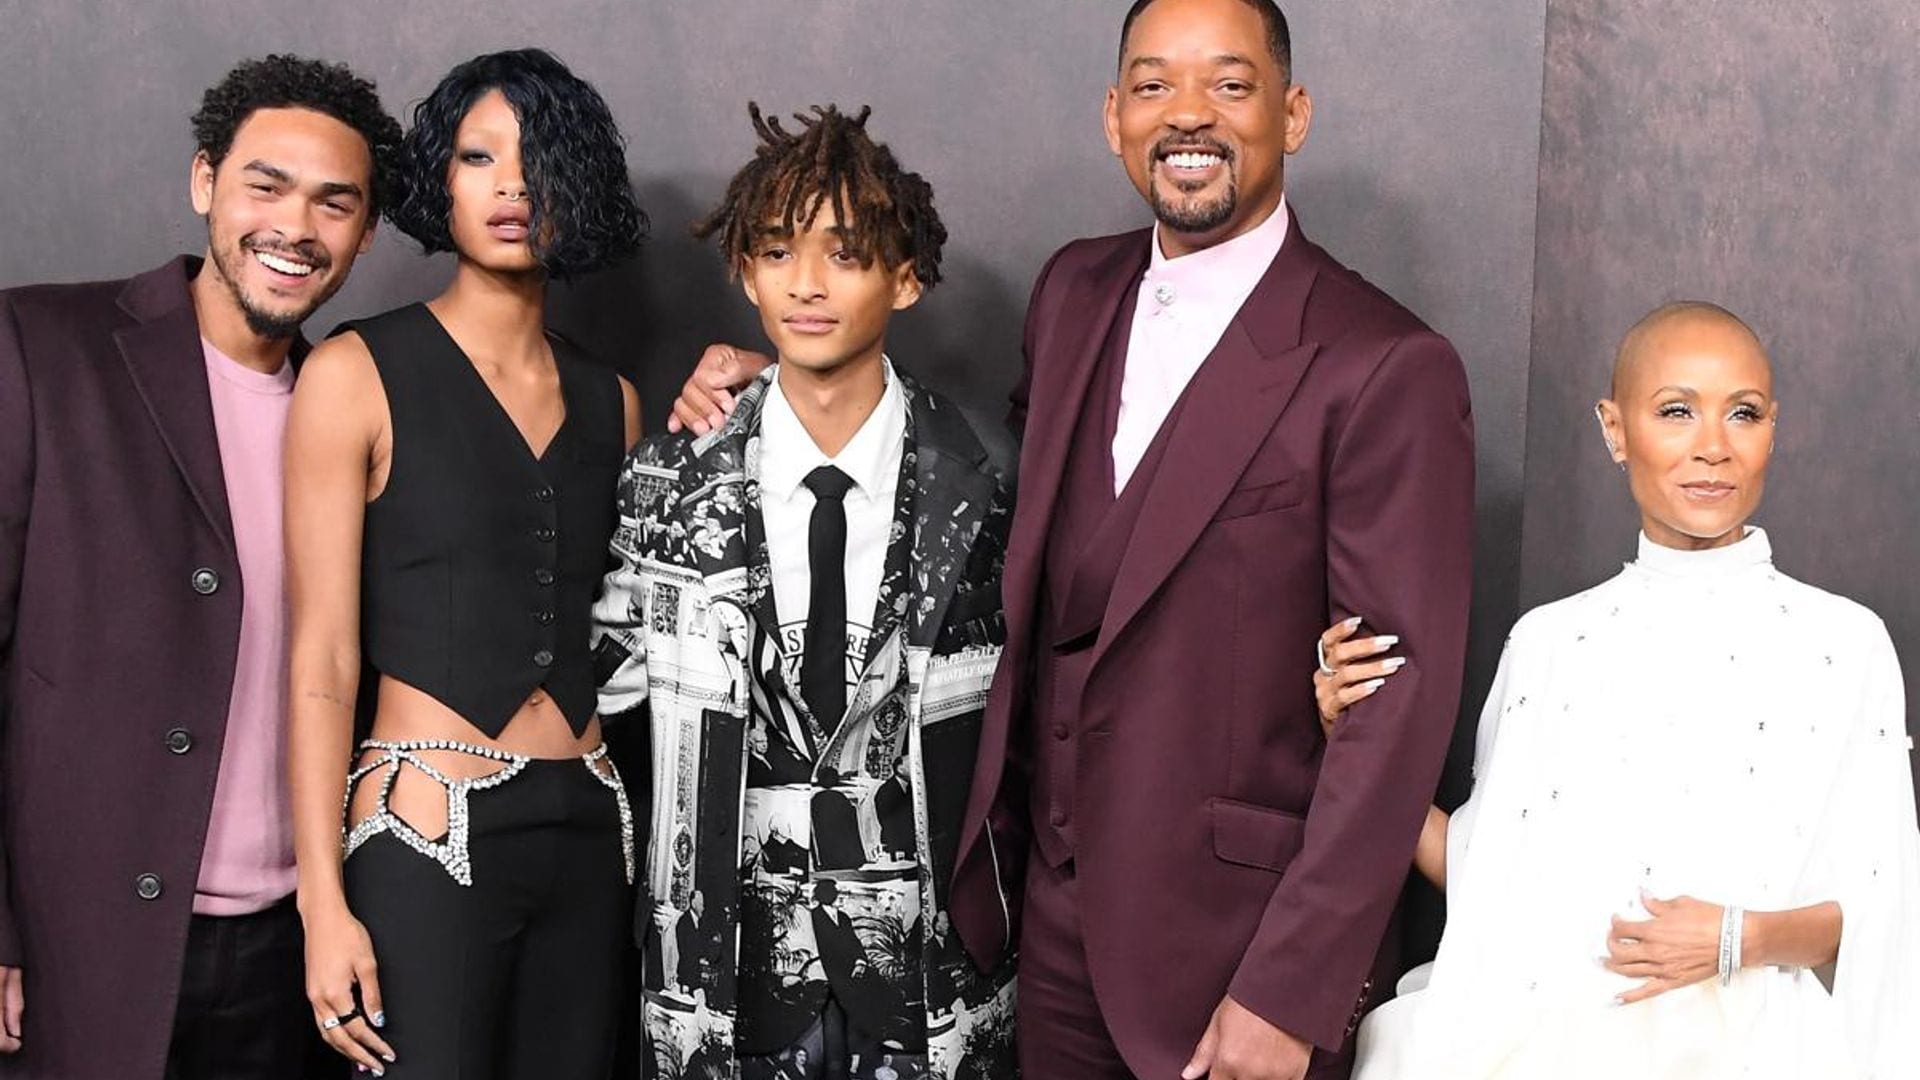 Christmas with the Smiths! Will, Jada, and the kids pose in ugly sweaters